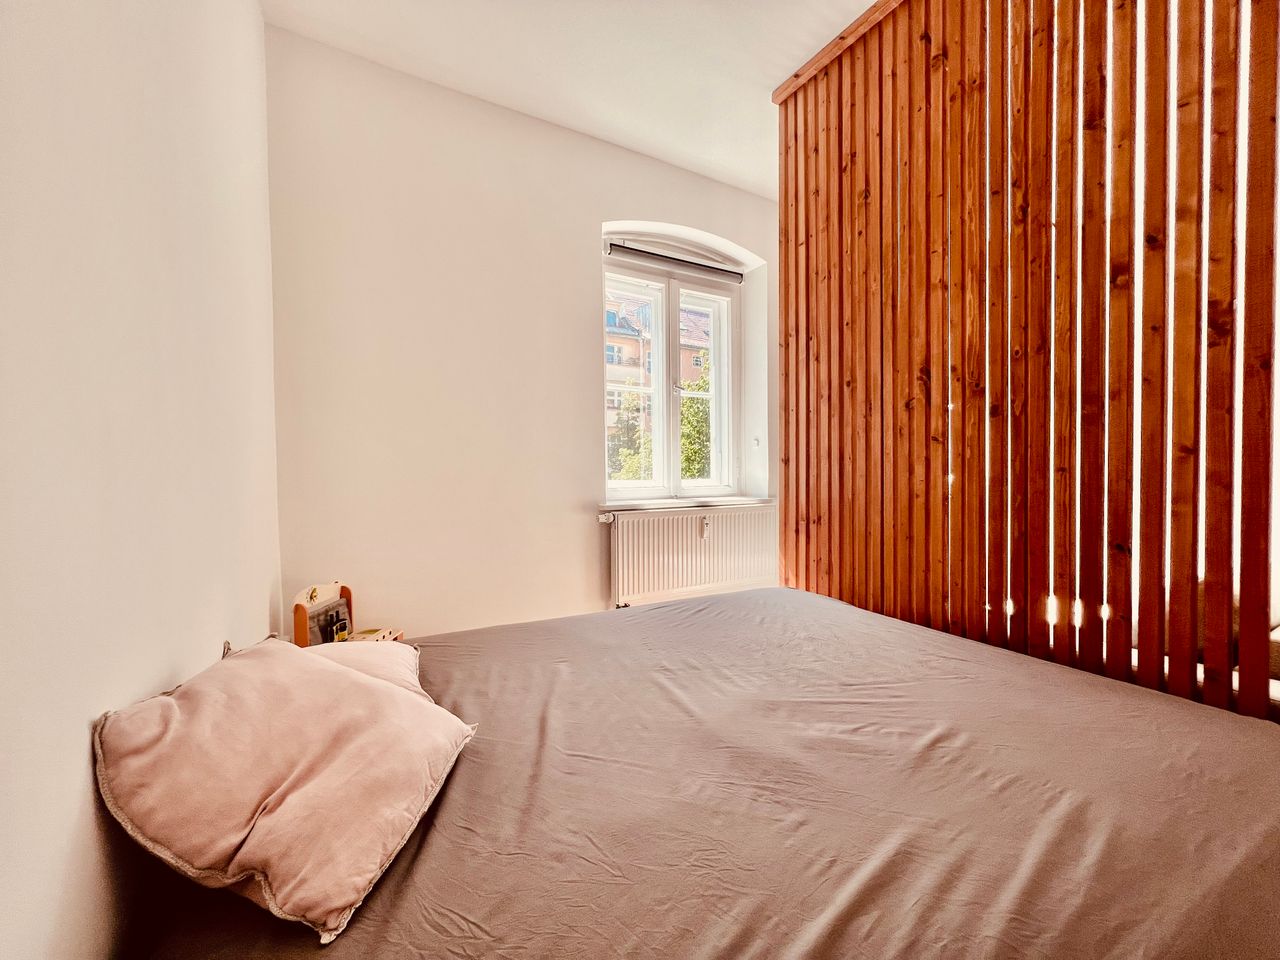 Welcome to Casa Leone - get comfortable in Prenzlauer Berg in this apartment with special features